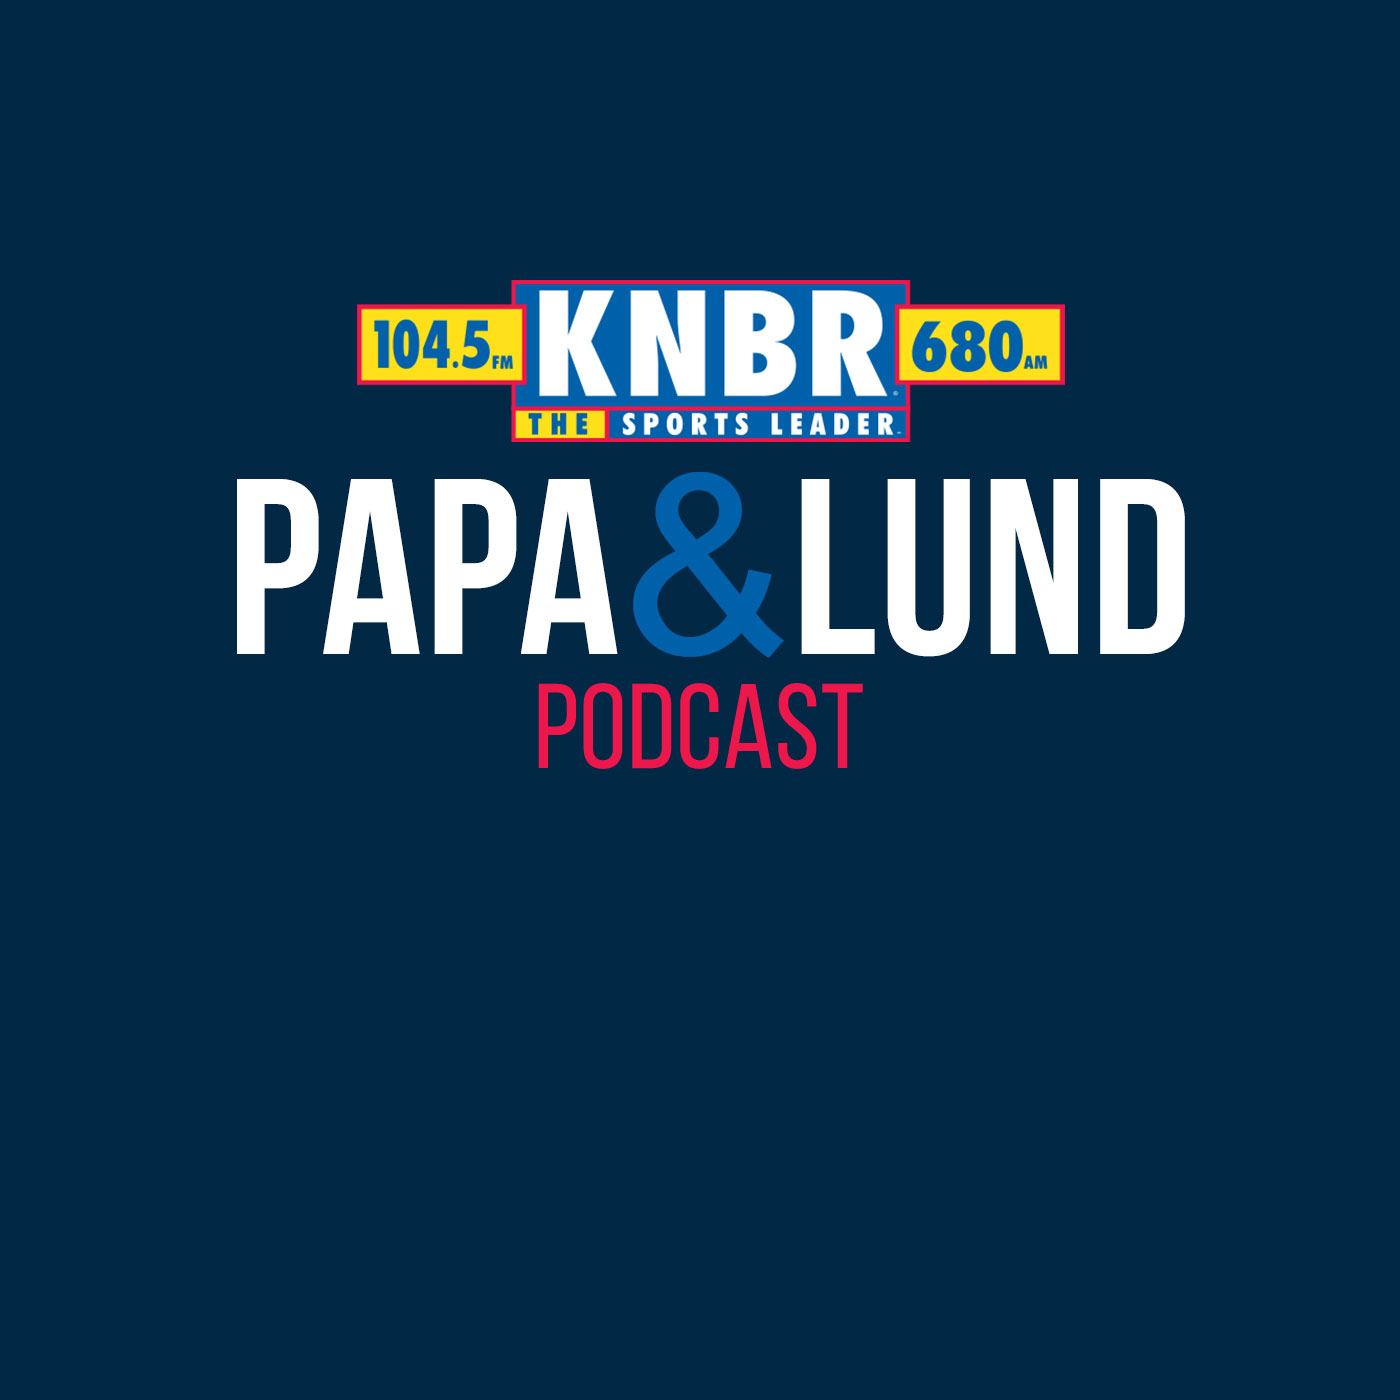 10-31 Joe Staley joins Papa & Lund to discuss how the 49ers continue to roll against the Rams, 49ers ceiling after adding Christian McCaffrey as well as a Halloween special selection of his favorite candy